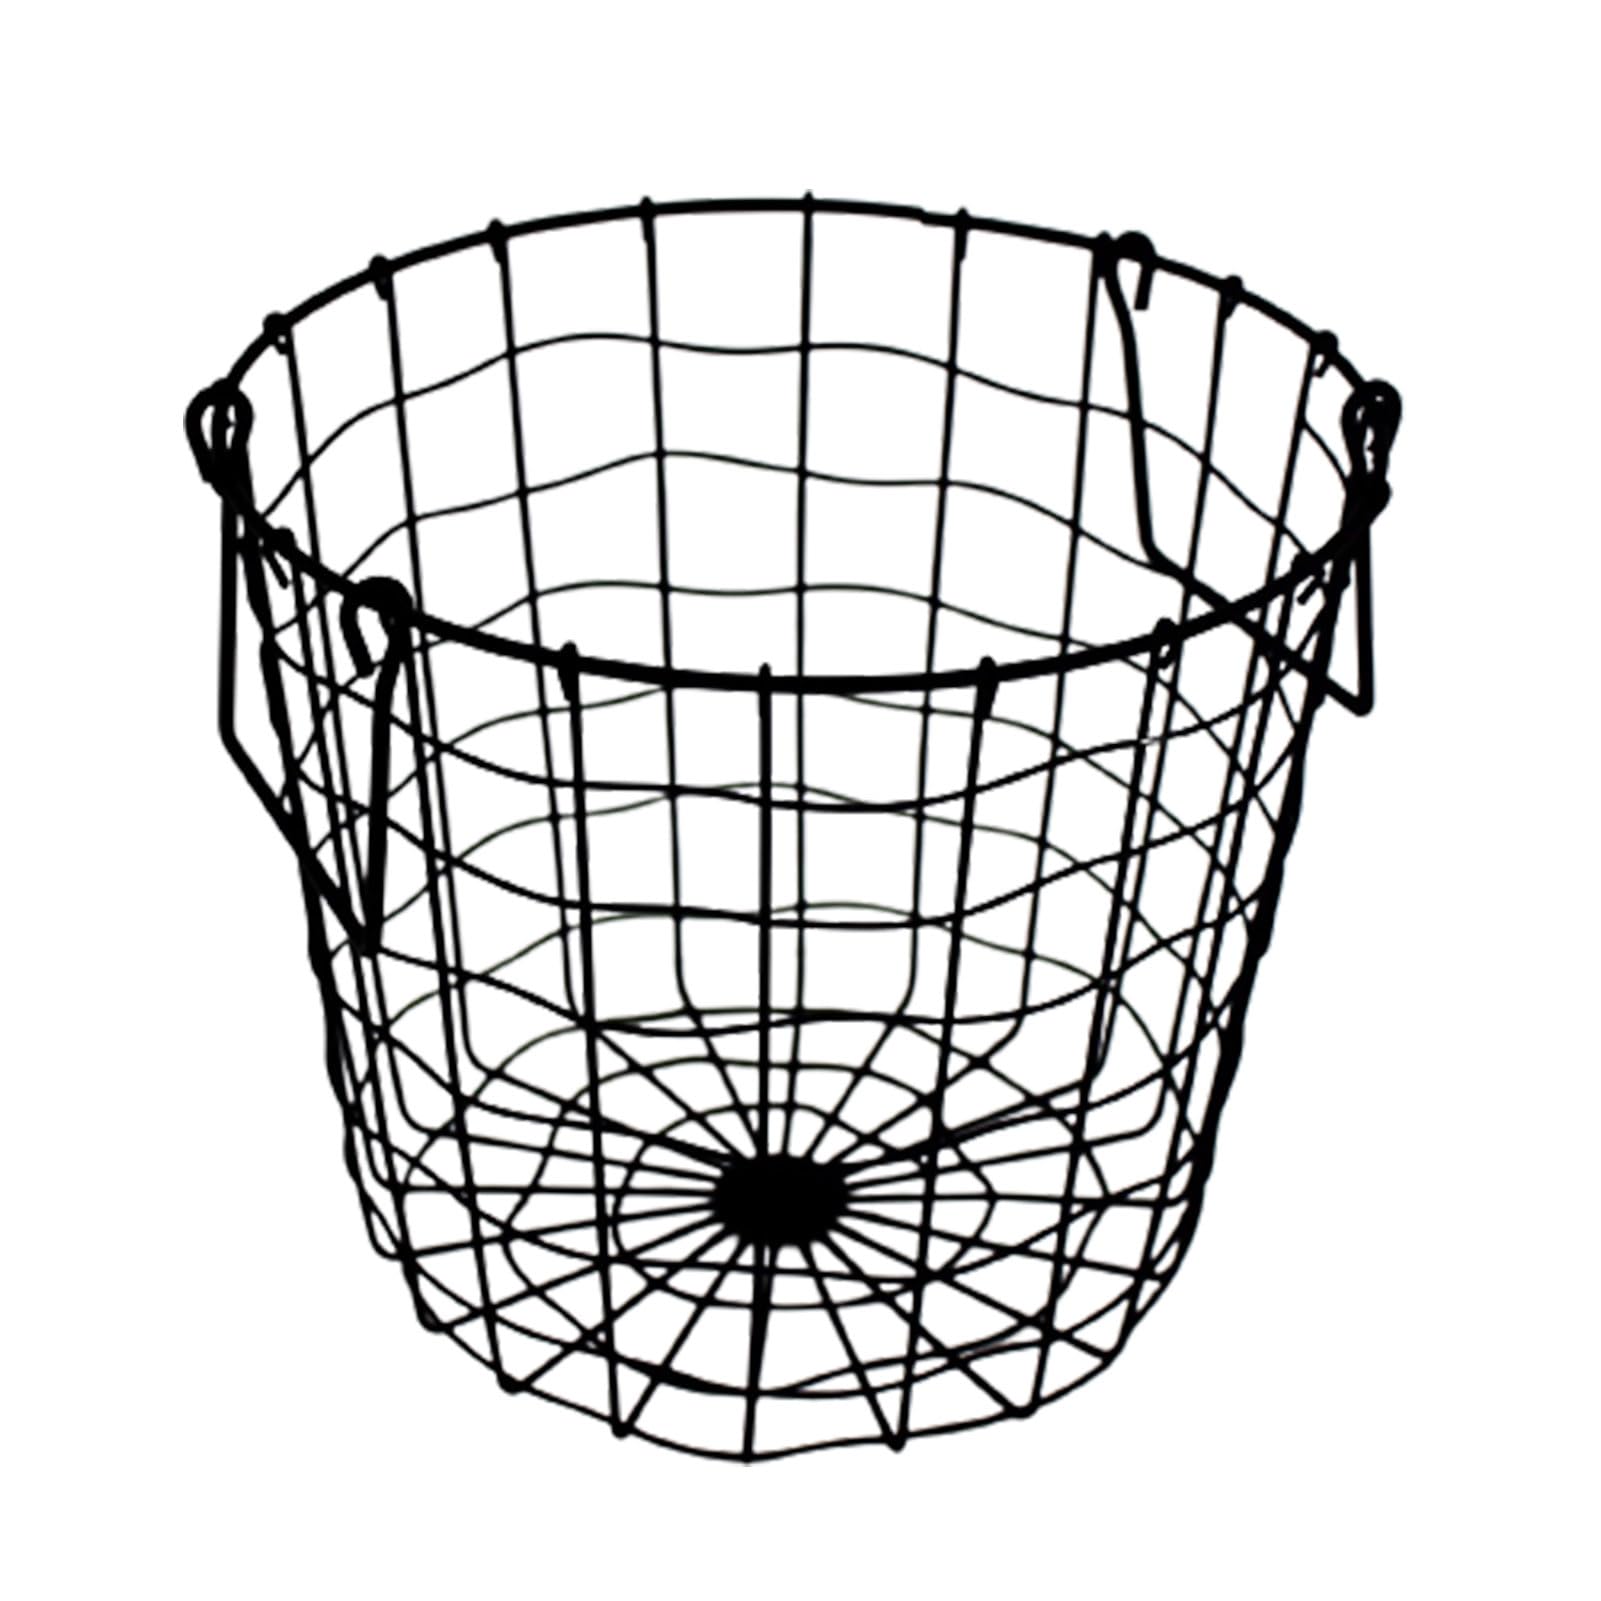 Laundry Basket Hamper Metal Clothes Basket, Round Black Wire Laundry Baskets with Handles for Bathroom Laundry Closet